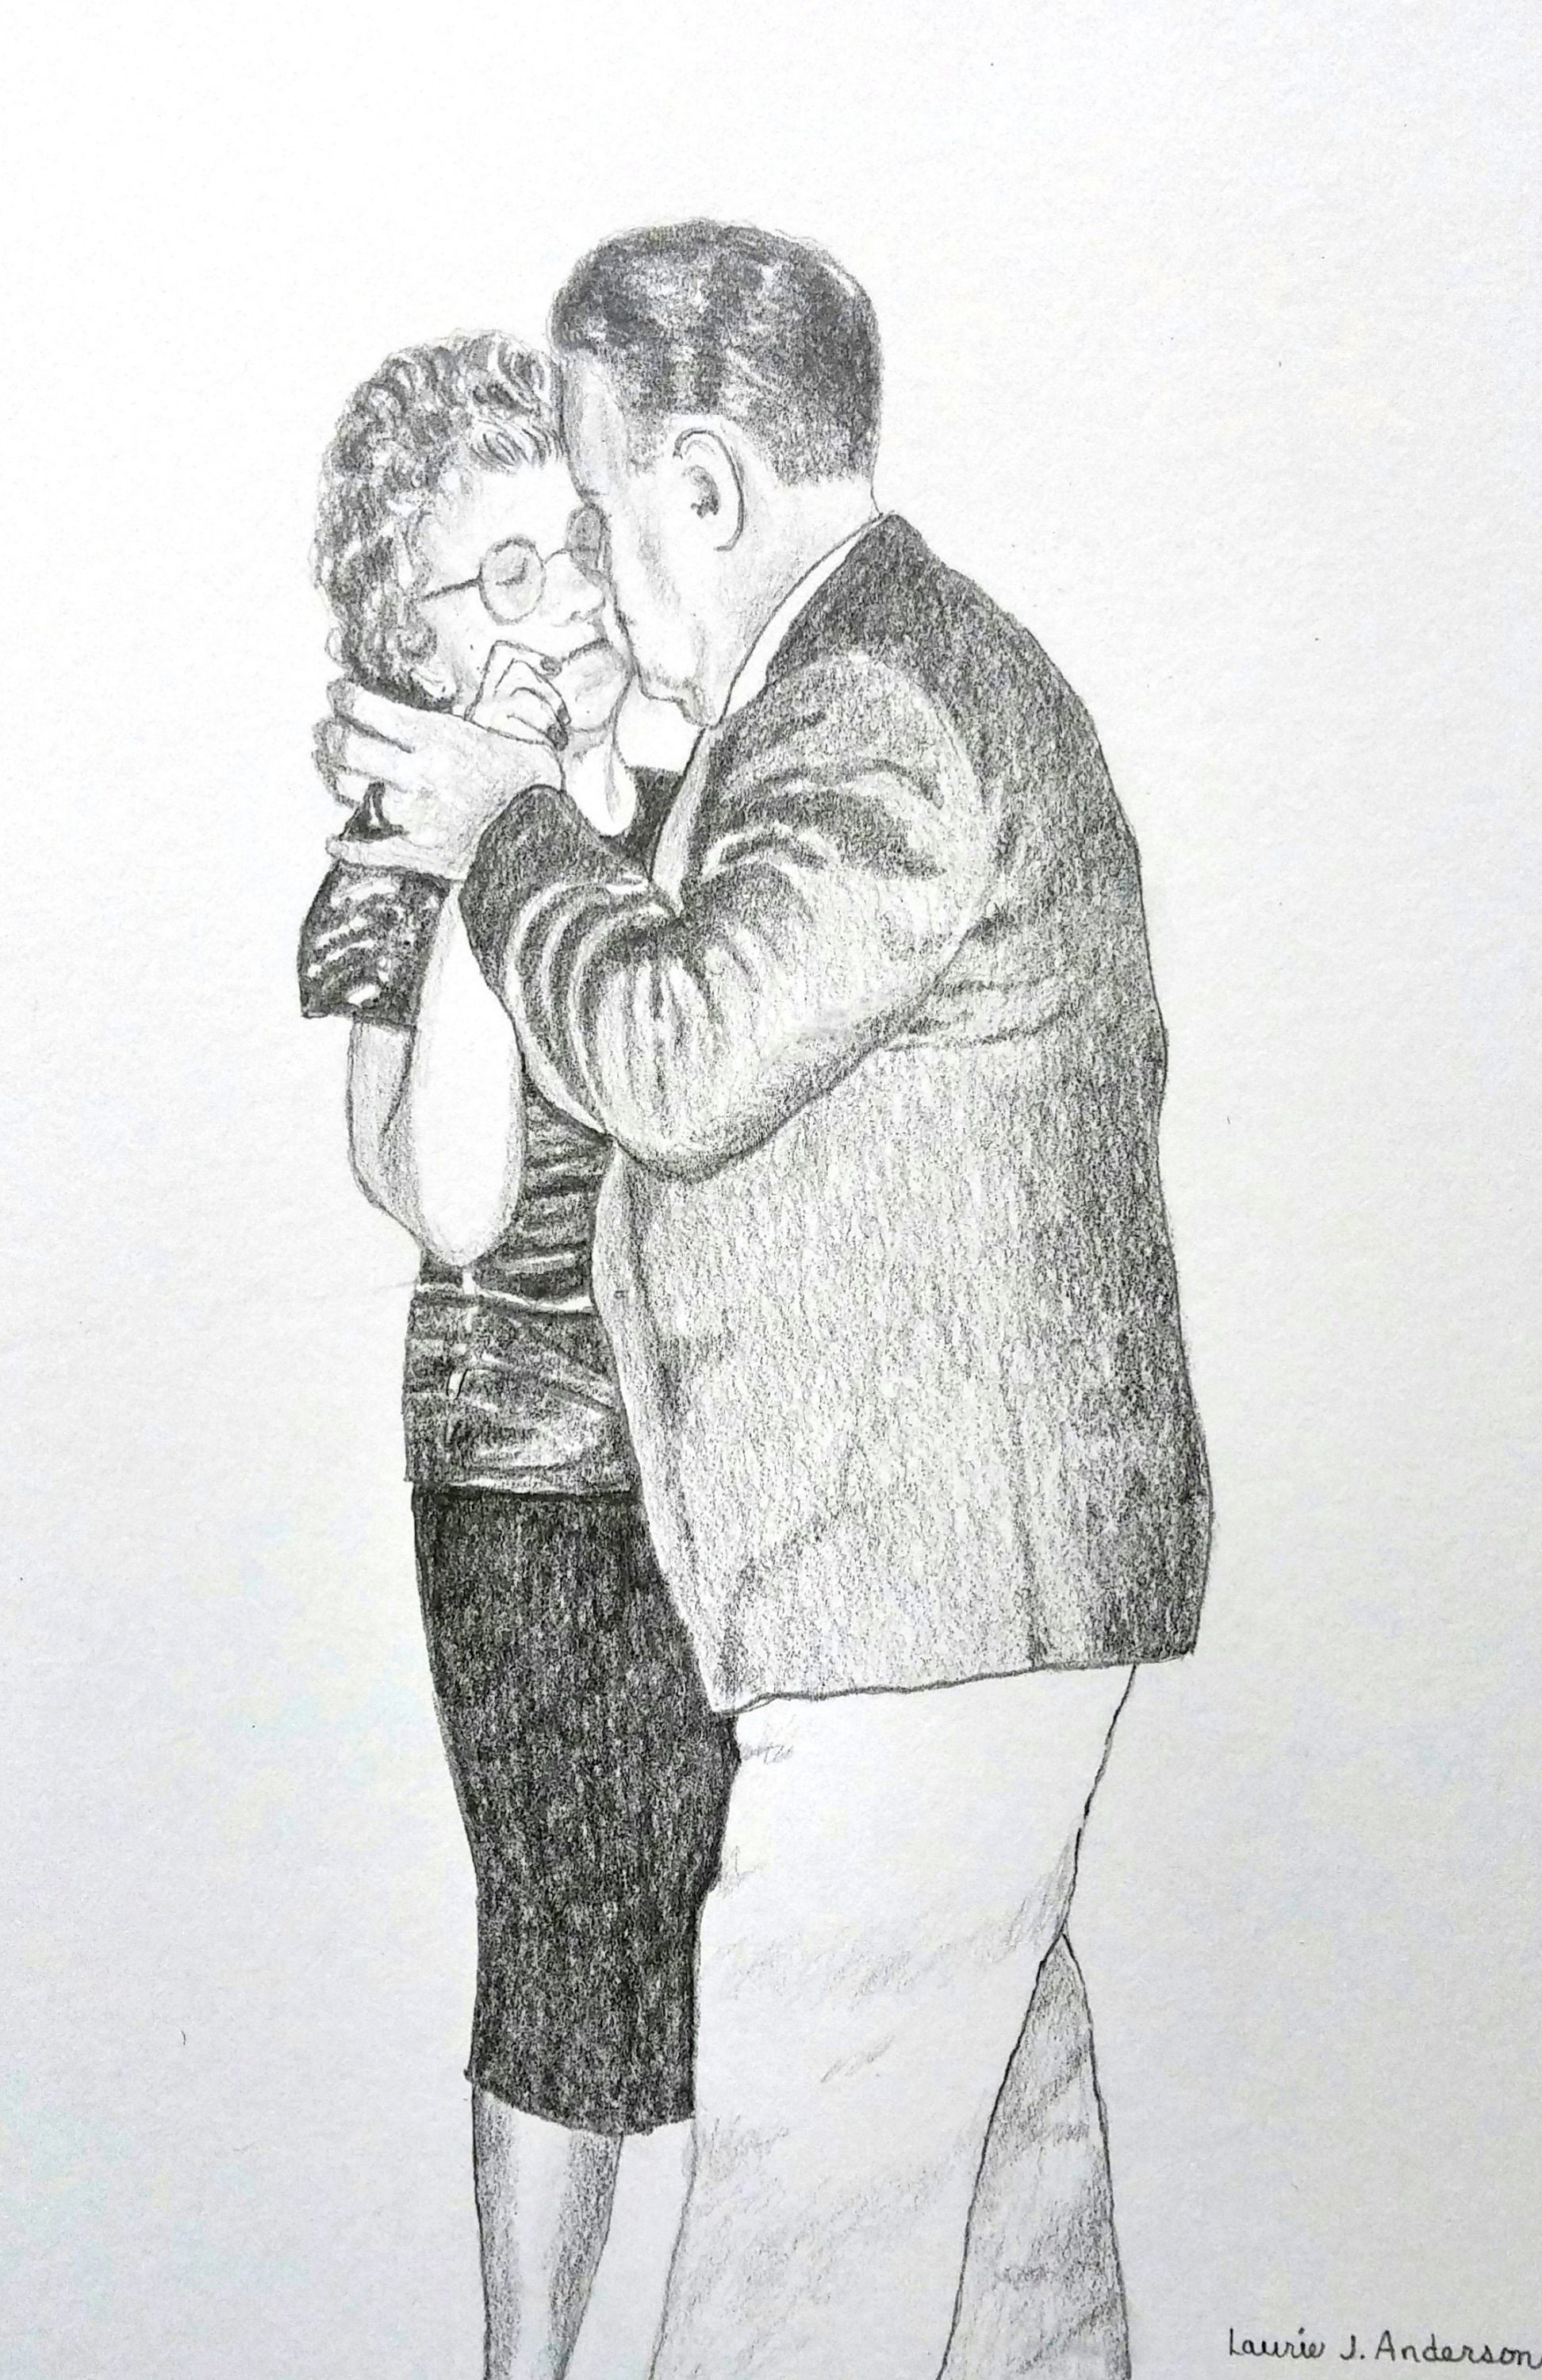 42 Simple Pencil Sketches Of Couples In Love - Artistic Haven